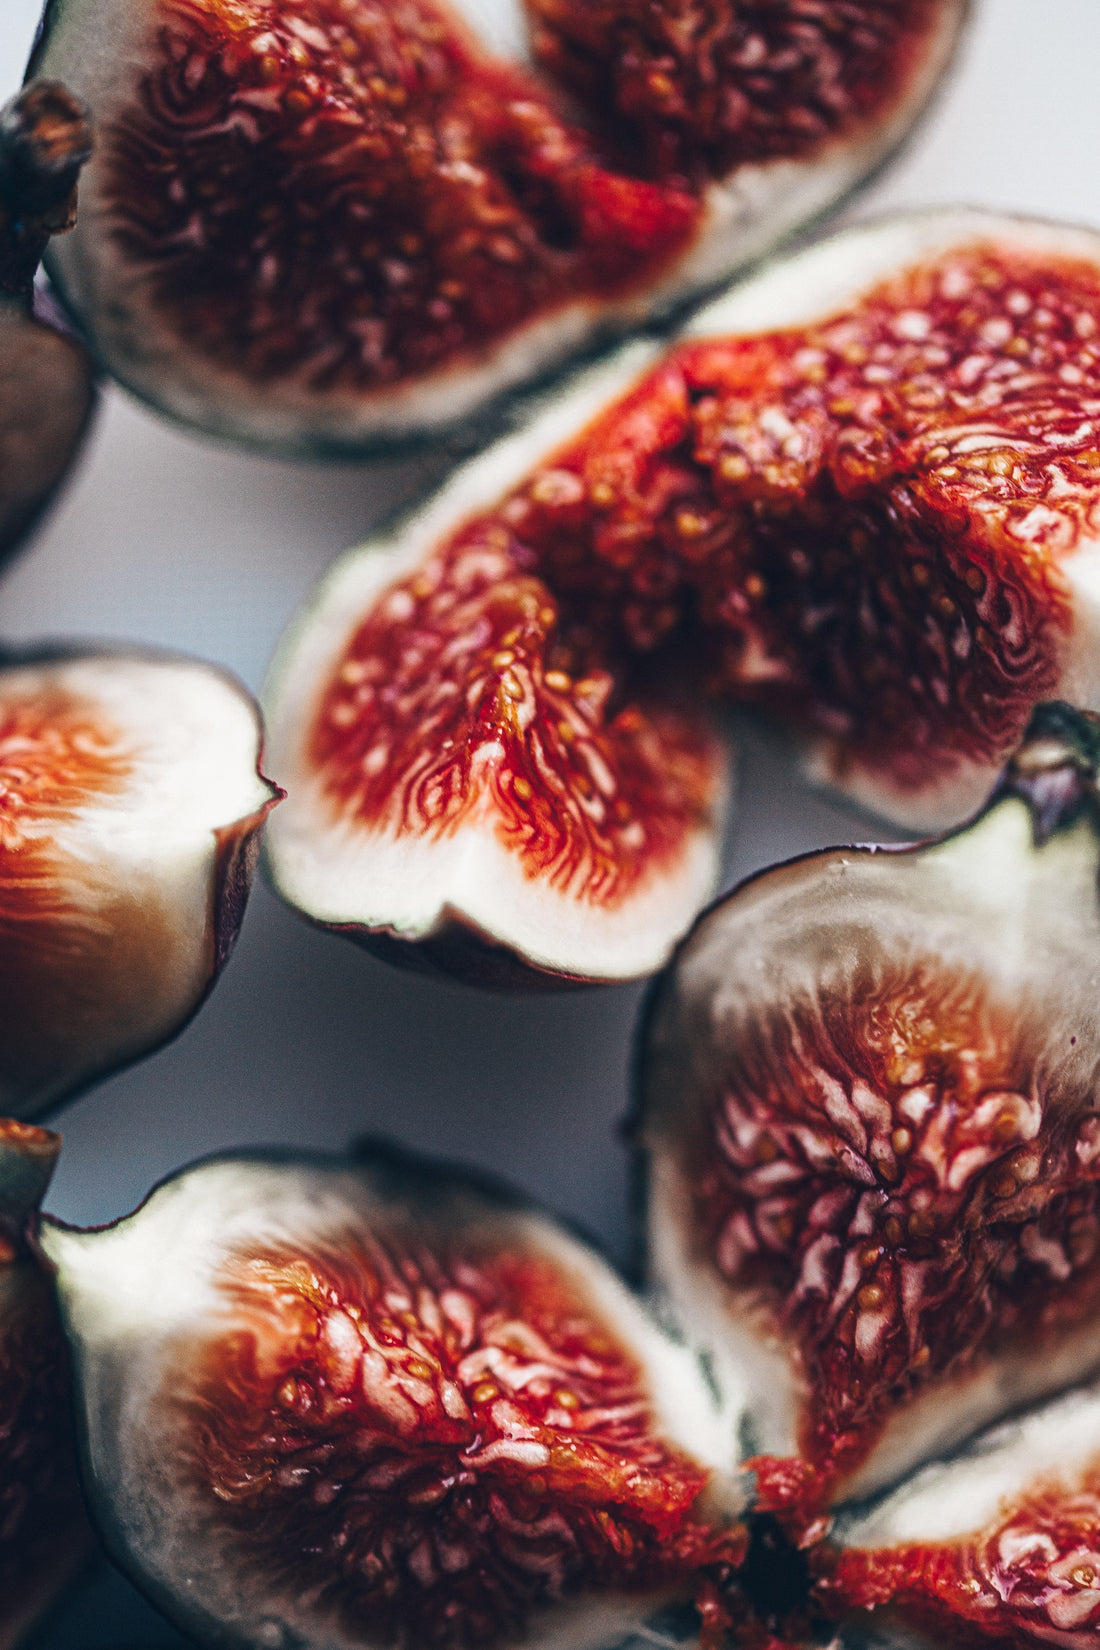 Are Figs Good for Diabetes